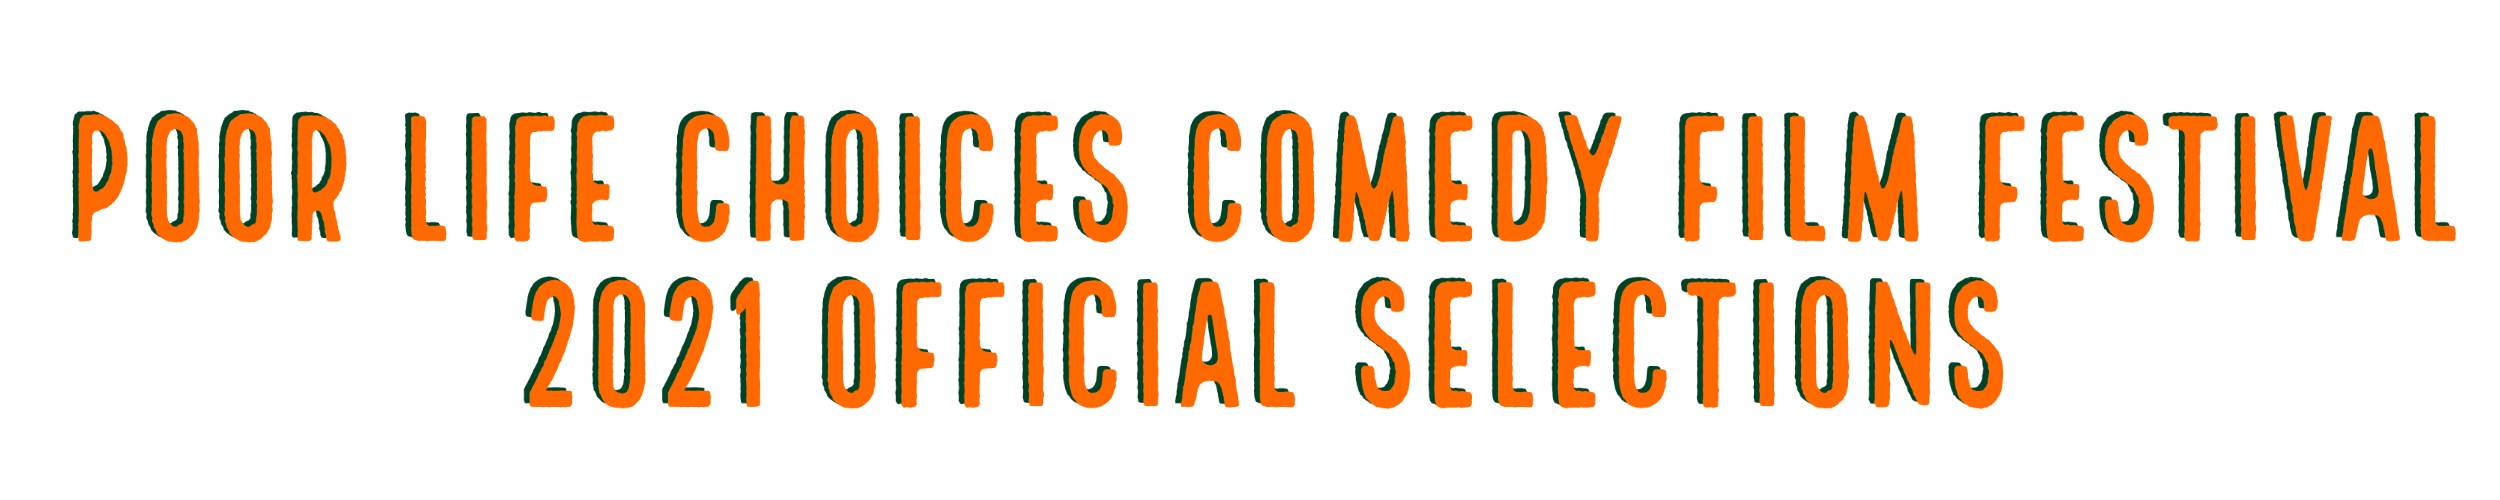 POOR LIFE CHOICES COMEDY FILM FESTIVAL 2021 OFFICIAL SELECTIONS